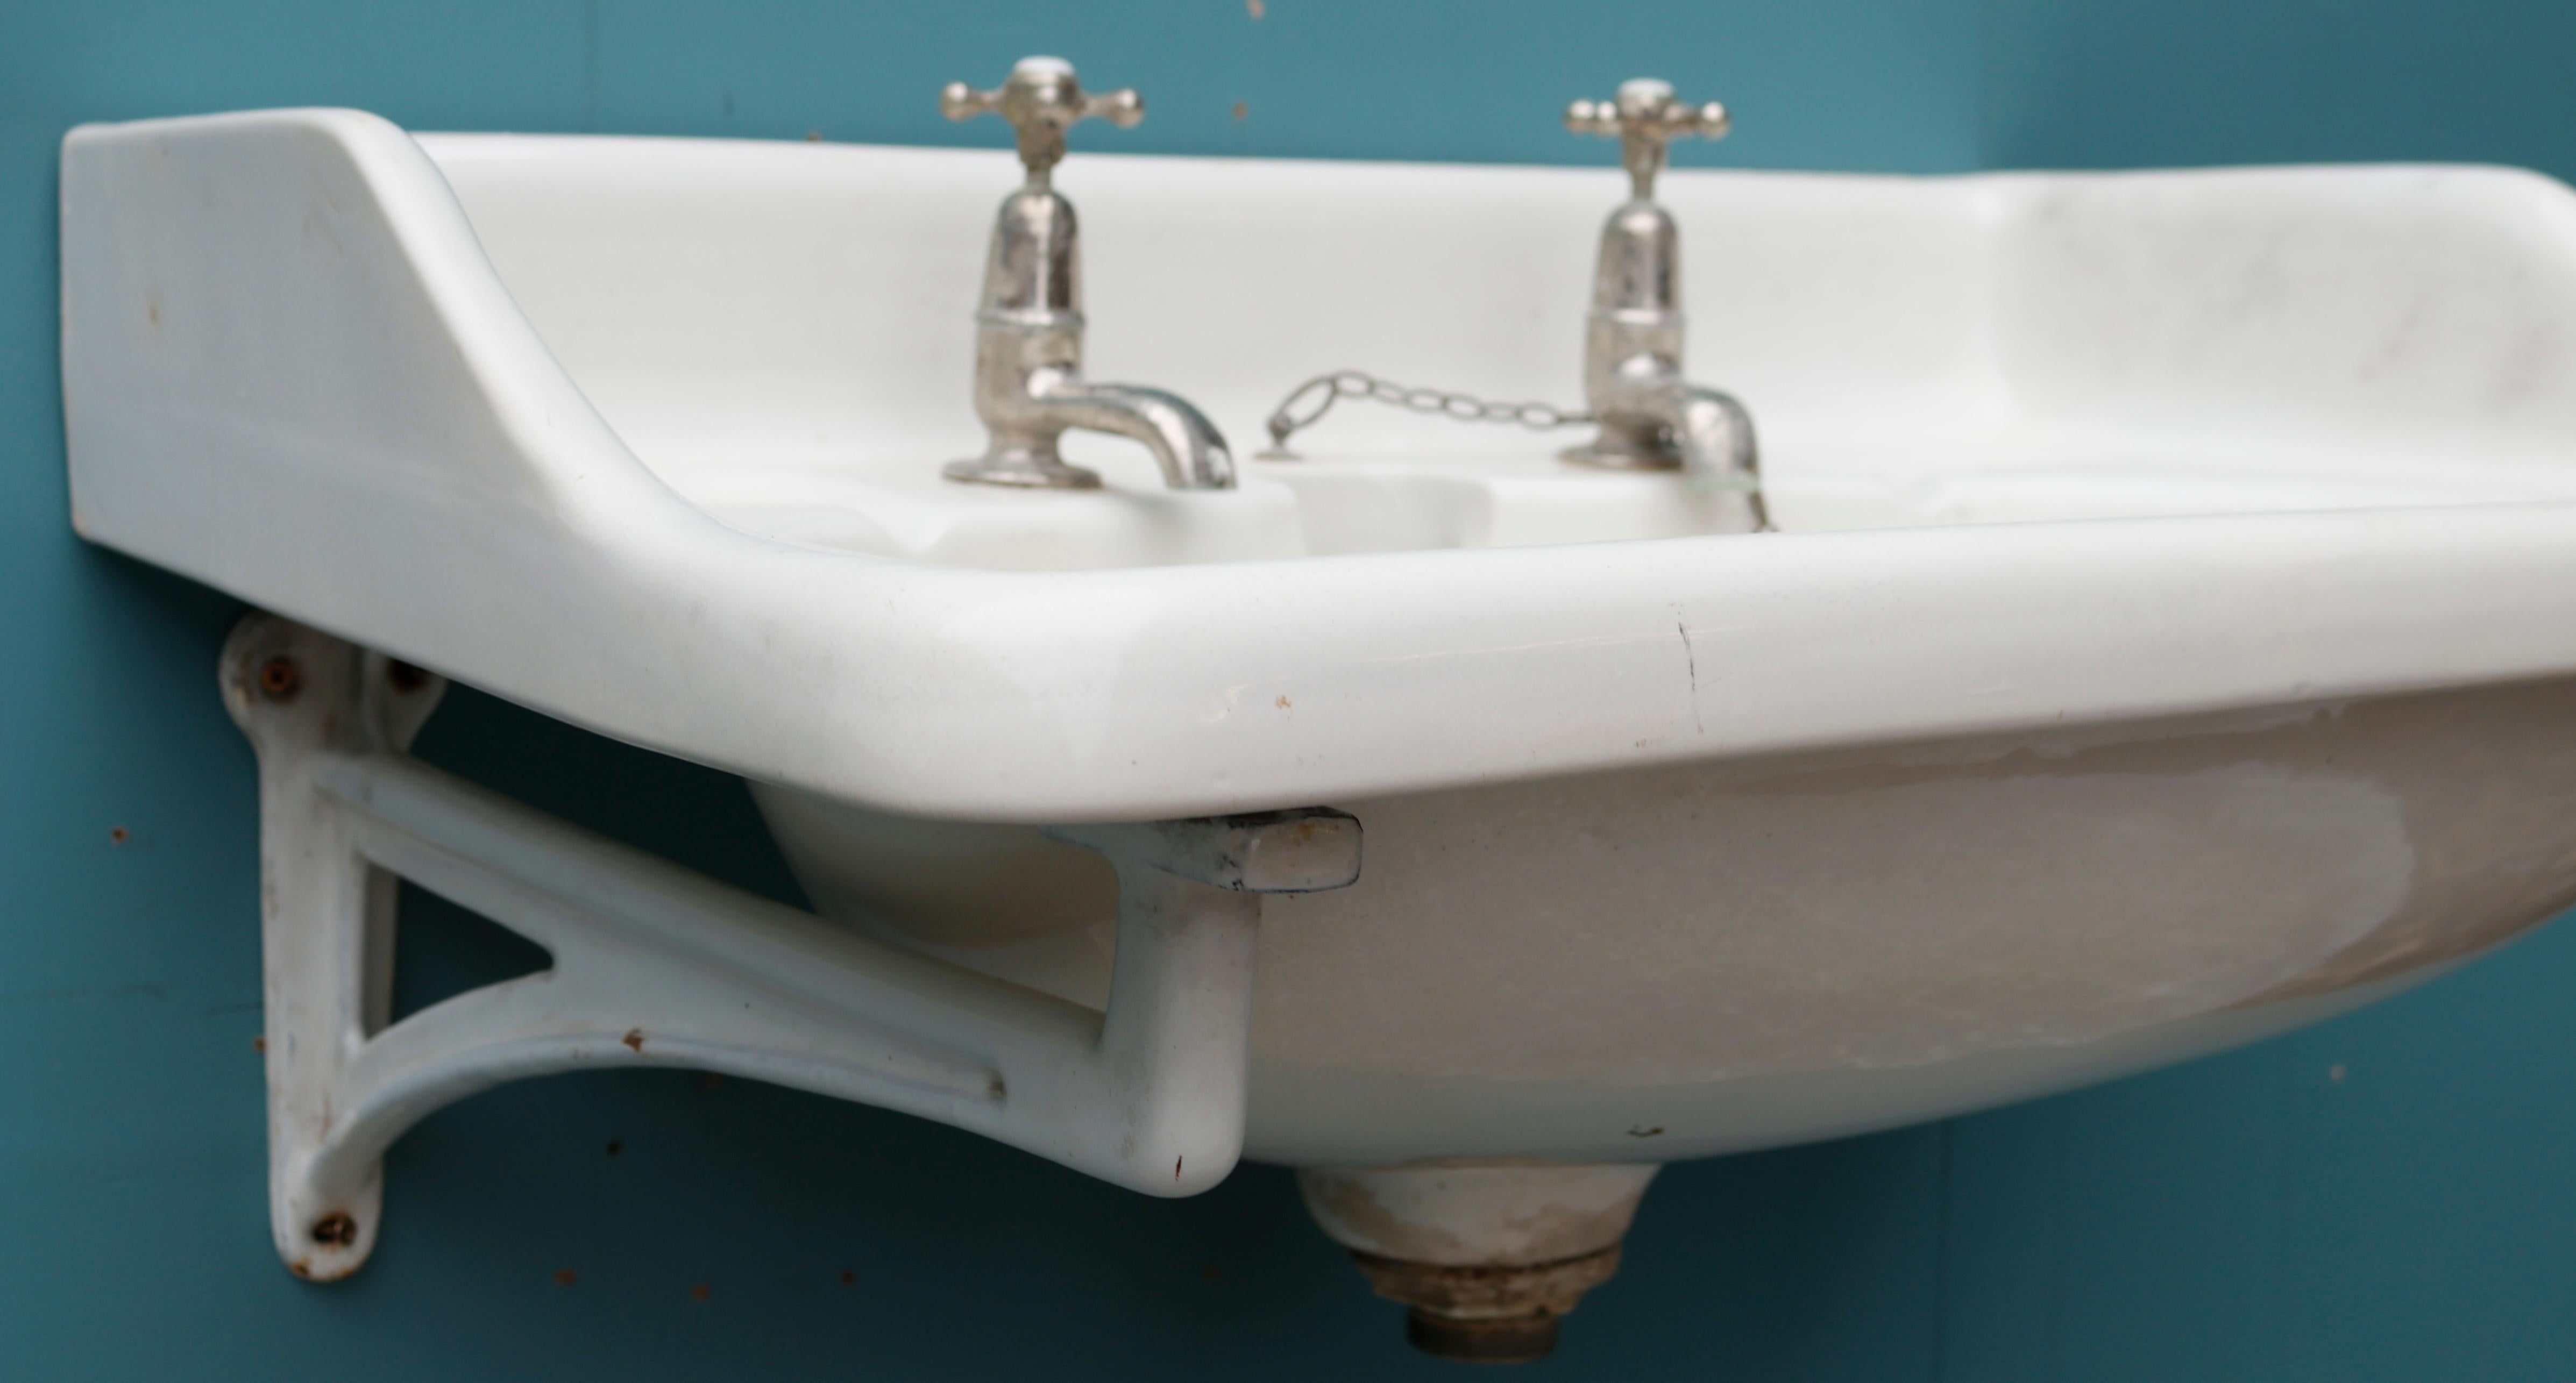 A reclaimed ‘Ondo’ wash basin or sink manufactured by John Bolding.

